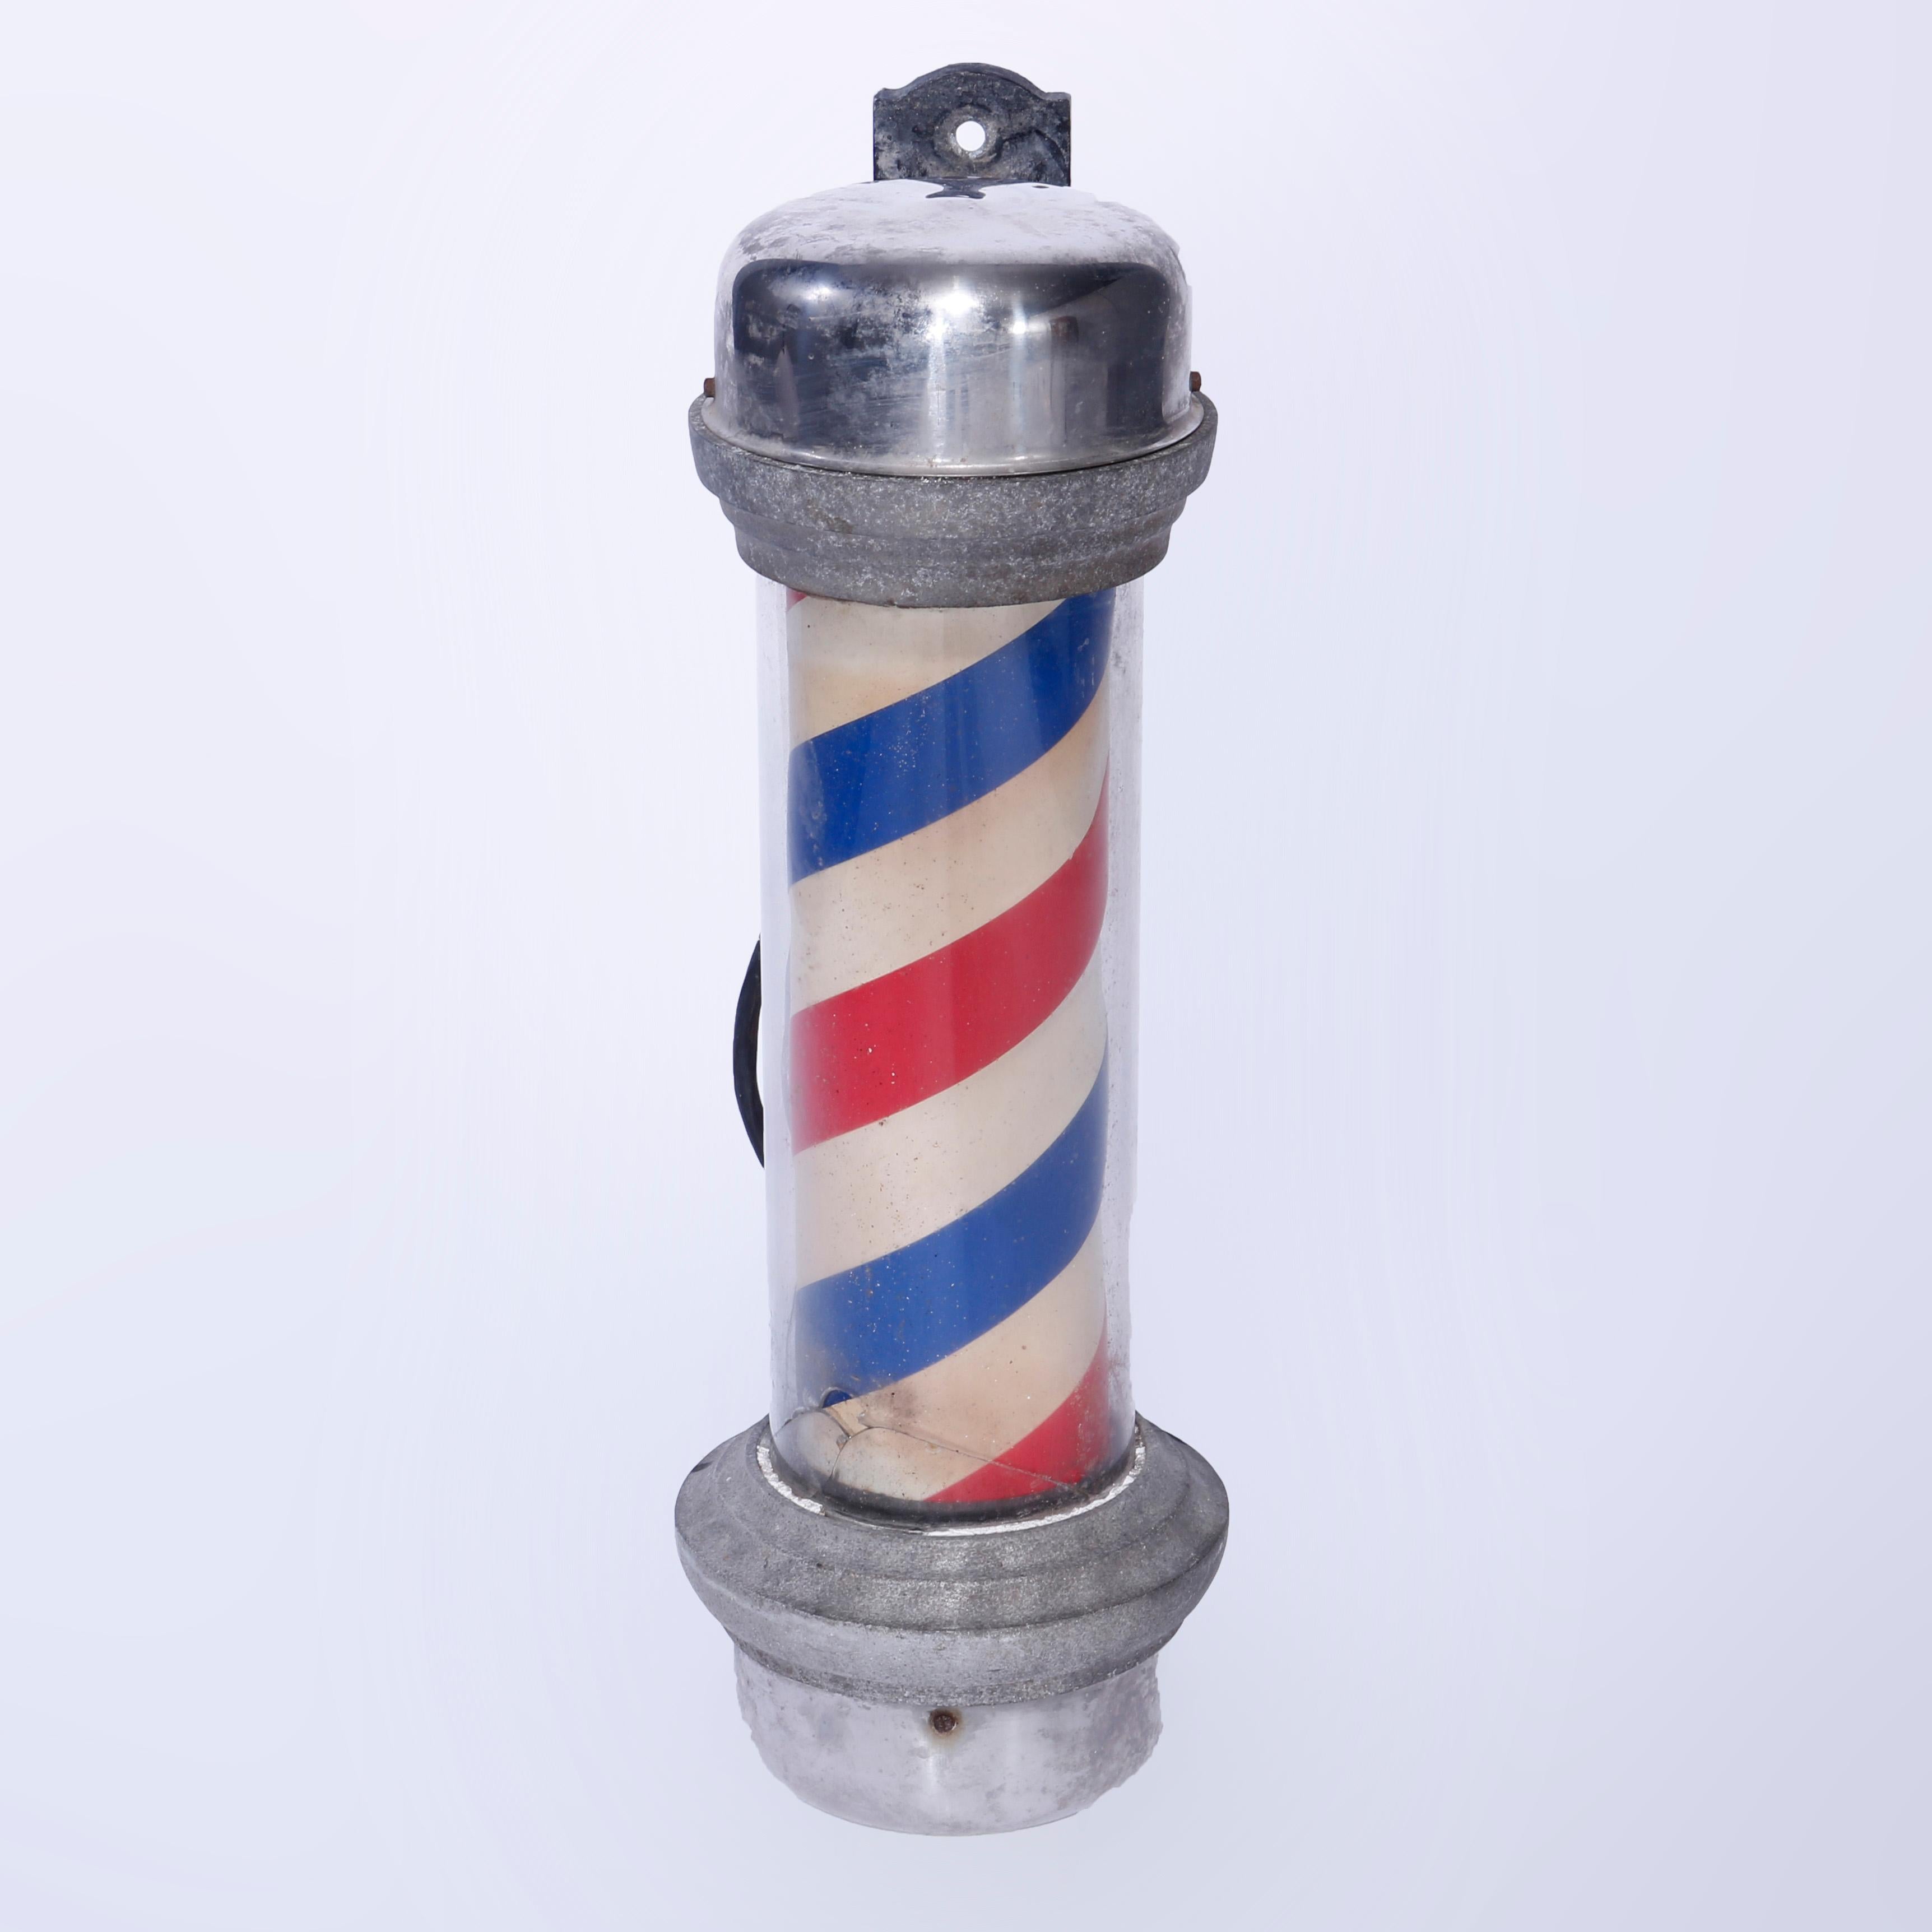 An antique barber shop pole by William Marvy & Co. St Paul MN offers the traditional red, white and blue twist striped pole encased in glass with chrome and cast iron wall bracket, maker label as photographed, circa 1930’s, 

Measures - 27.25'' H